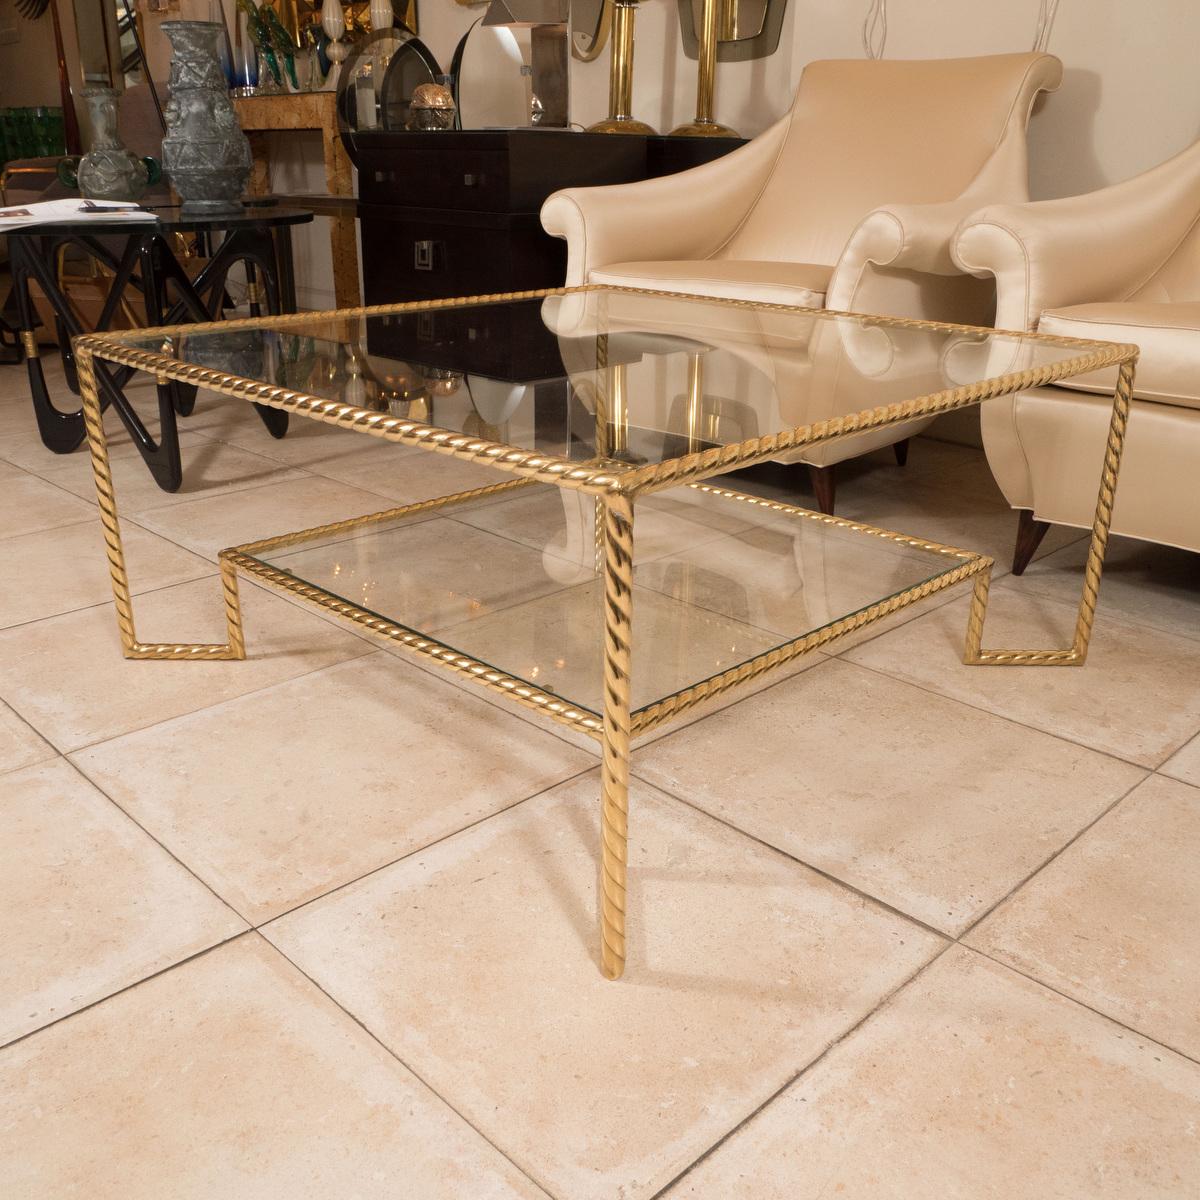 Two tier brass and glass coffee table with decorative 